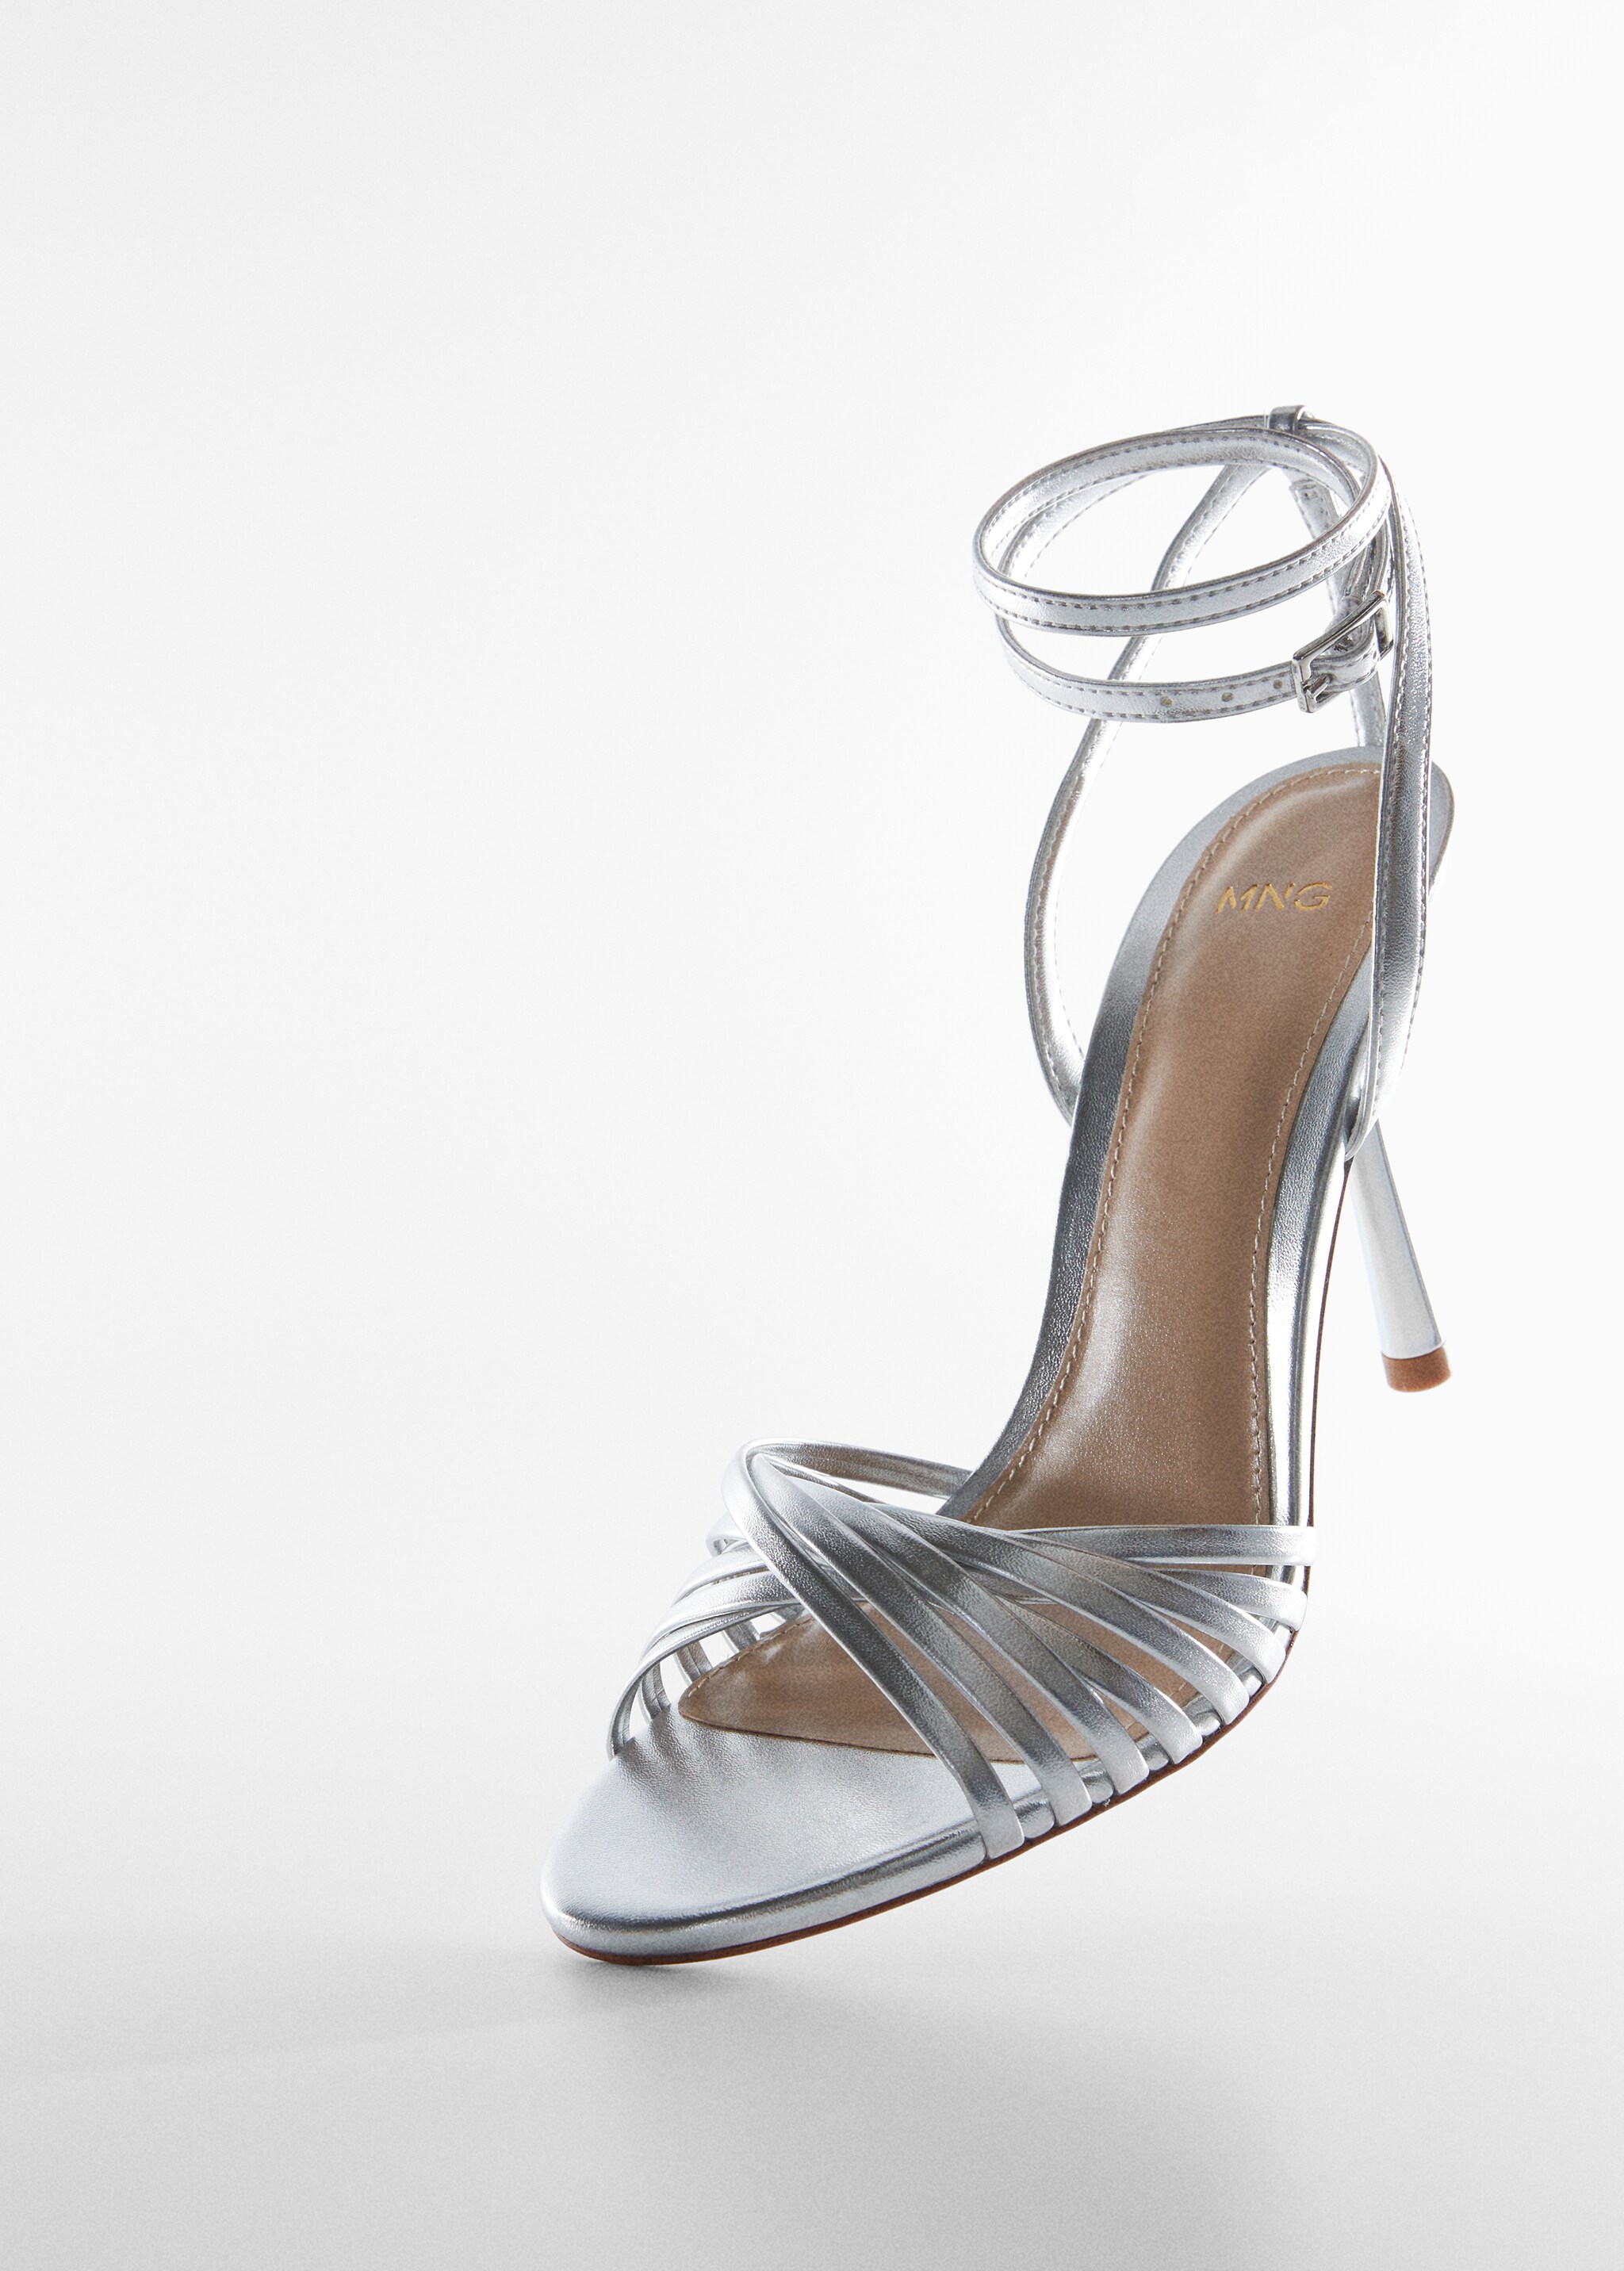 Strappy heeled sandals - Details of the article 5